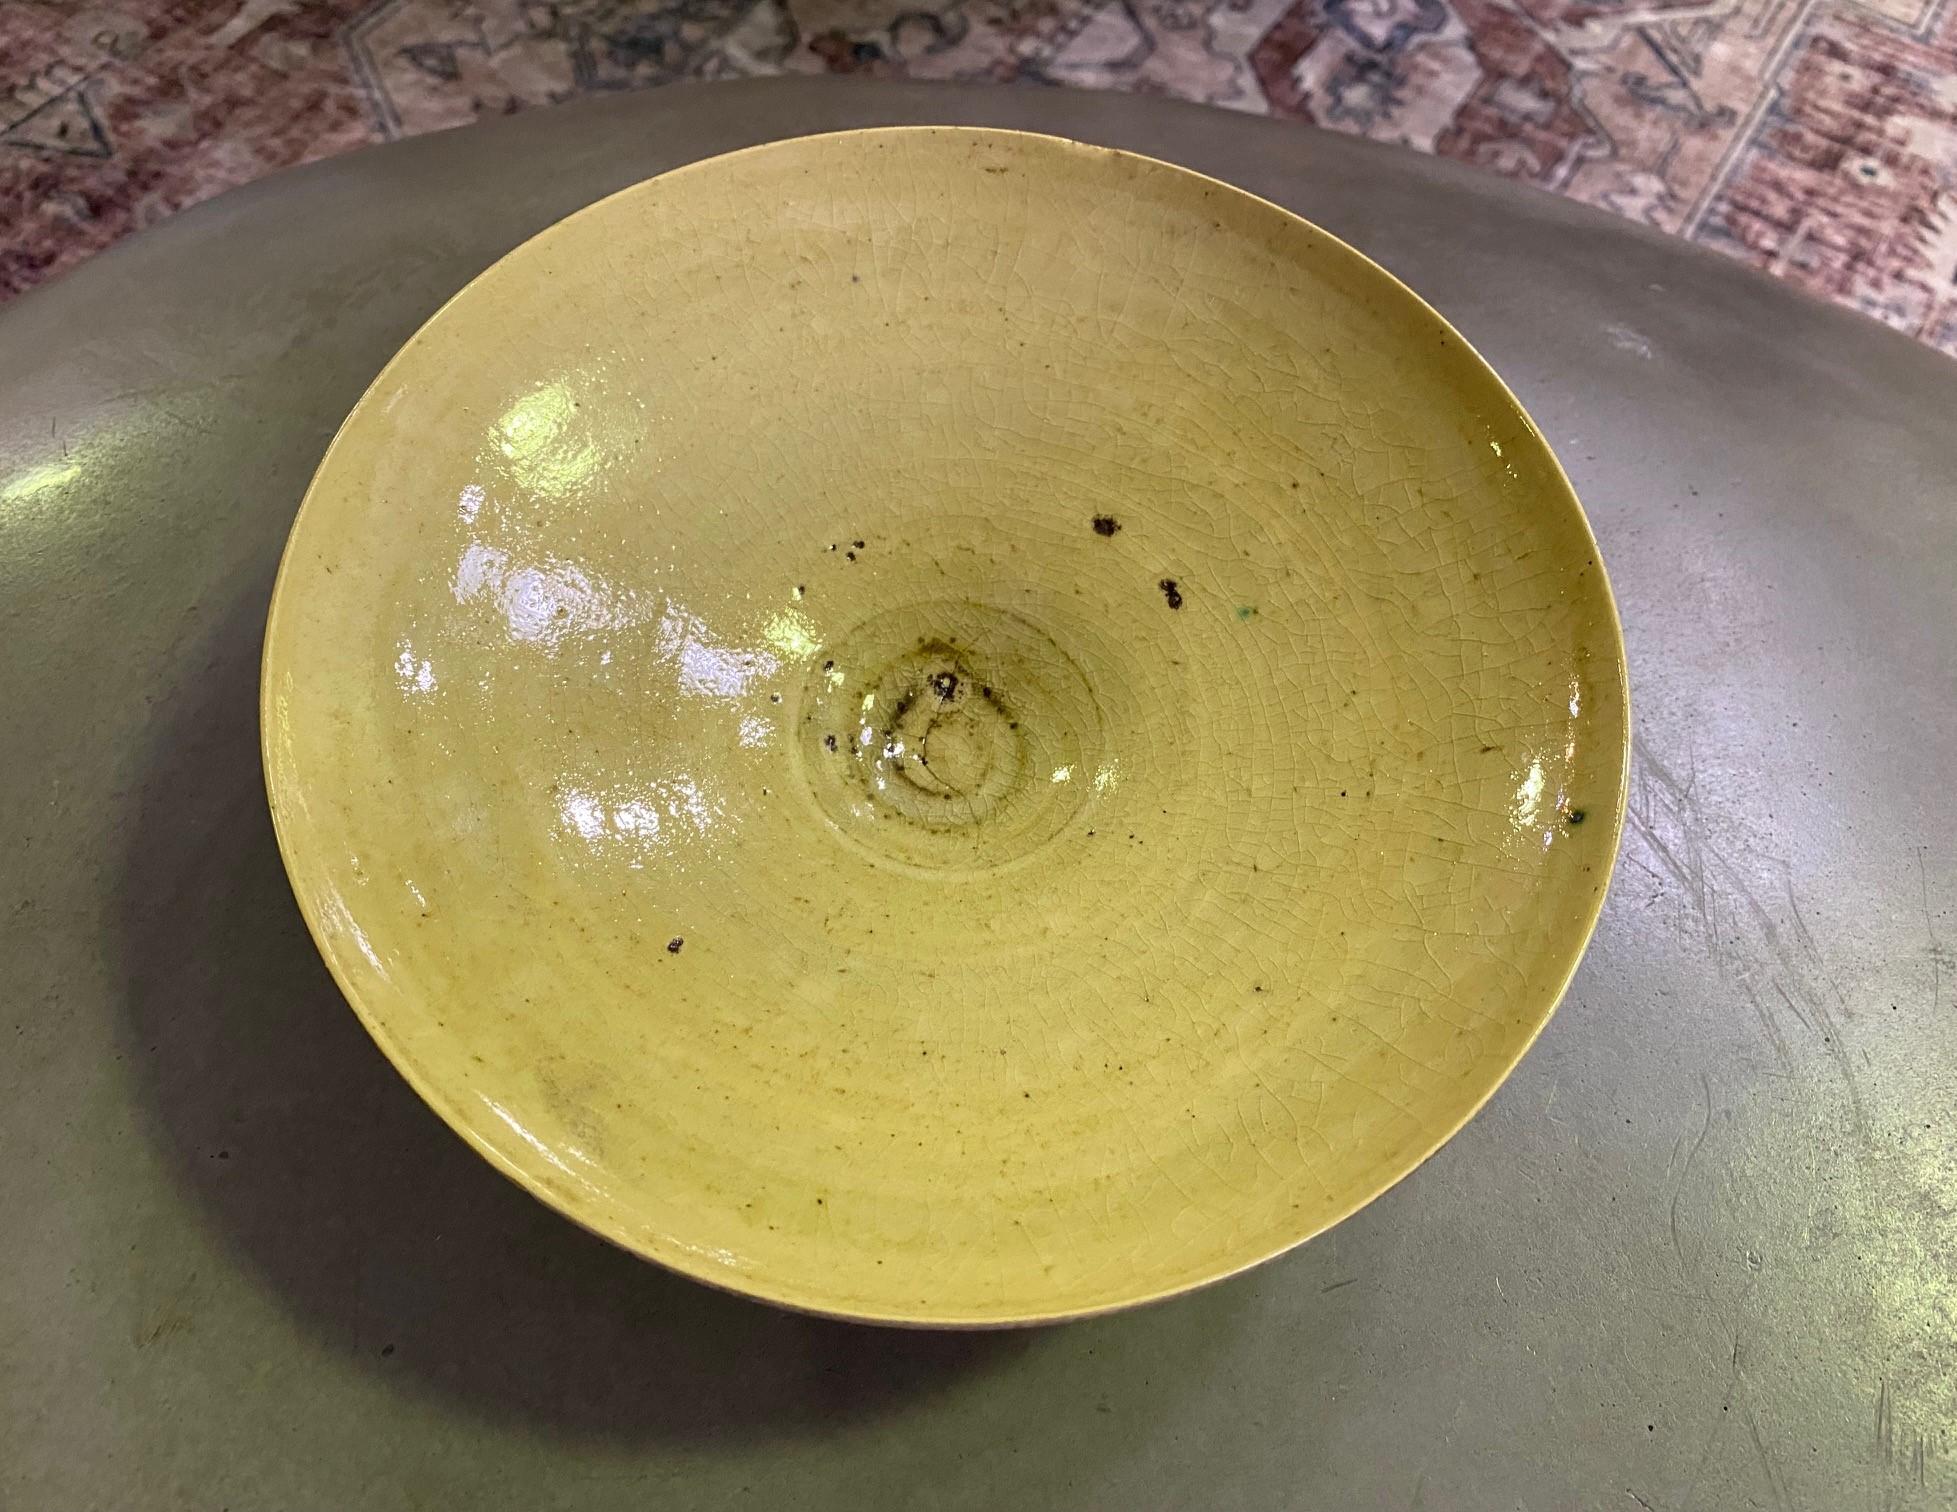 Lucie Rie Signed Stamped Yellow Speckle Glazed British Pottery Bowl, circa 1950s For Sale 8